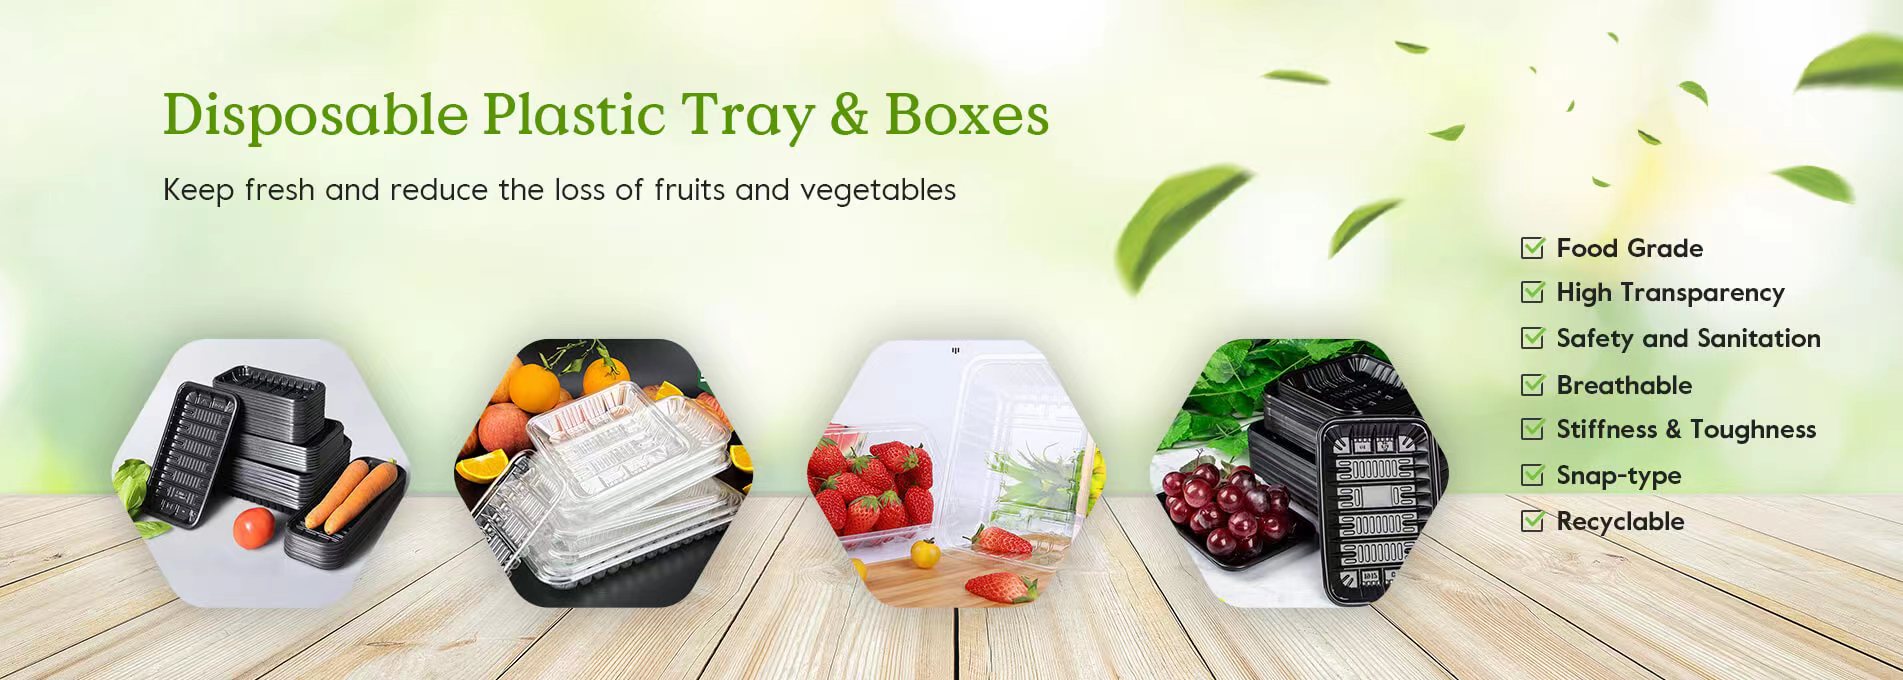 Disposable Plastic Tray & Boxes